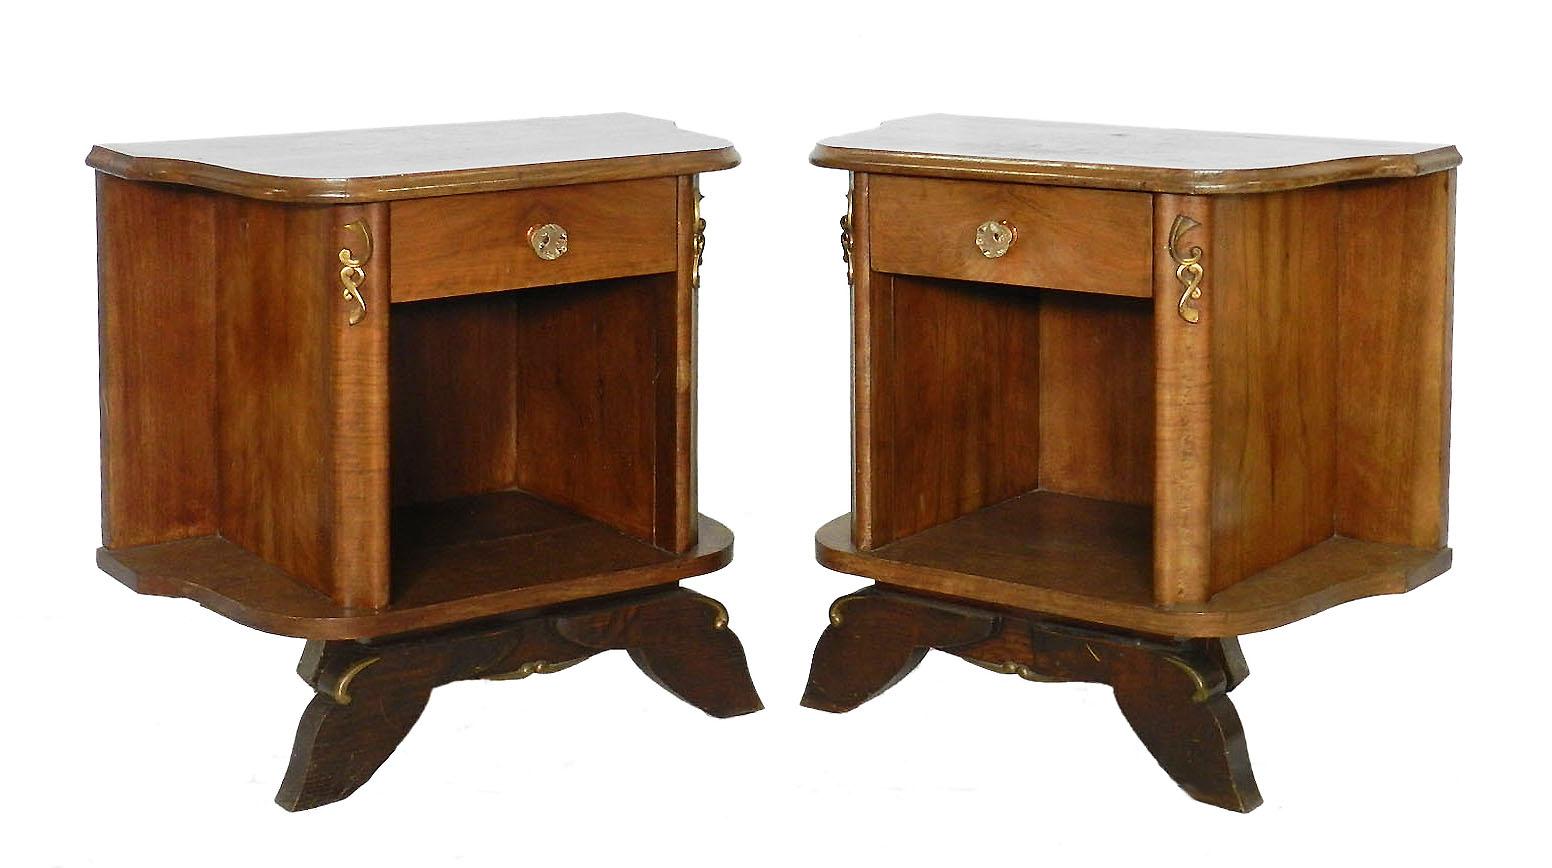 Pair of French nightstands side cabinets bedside tables, midcentury
Quartered walnut tops
Single drawer
Good vintage condition for their age with minor marks of use.